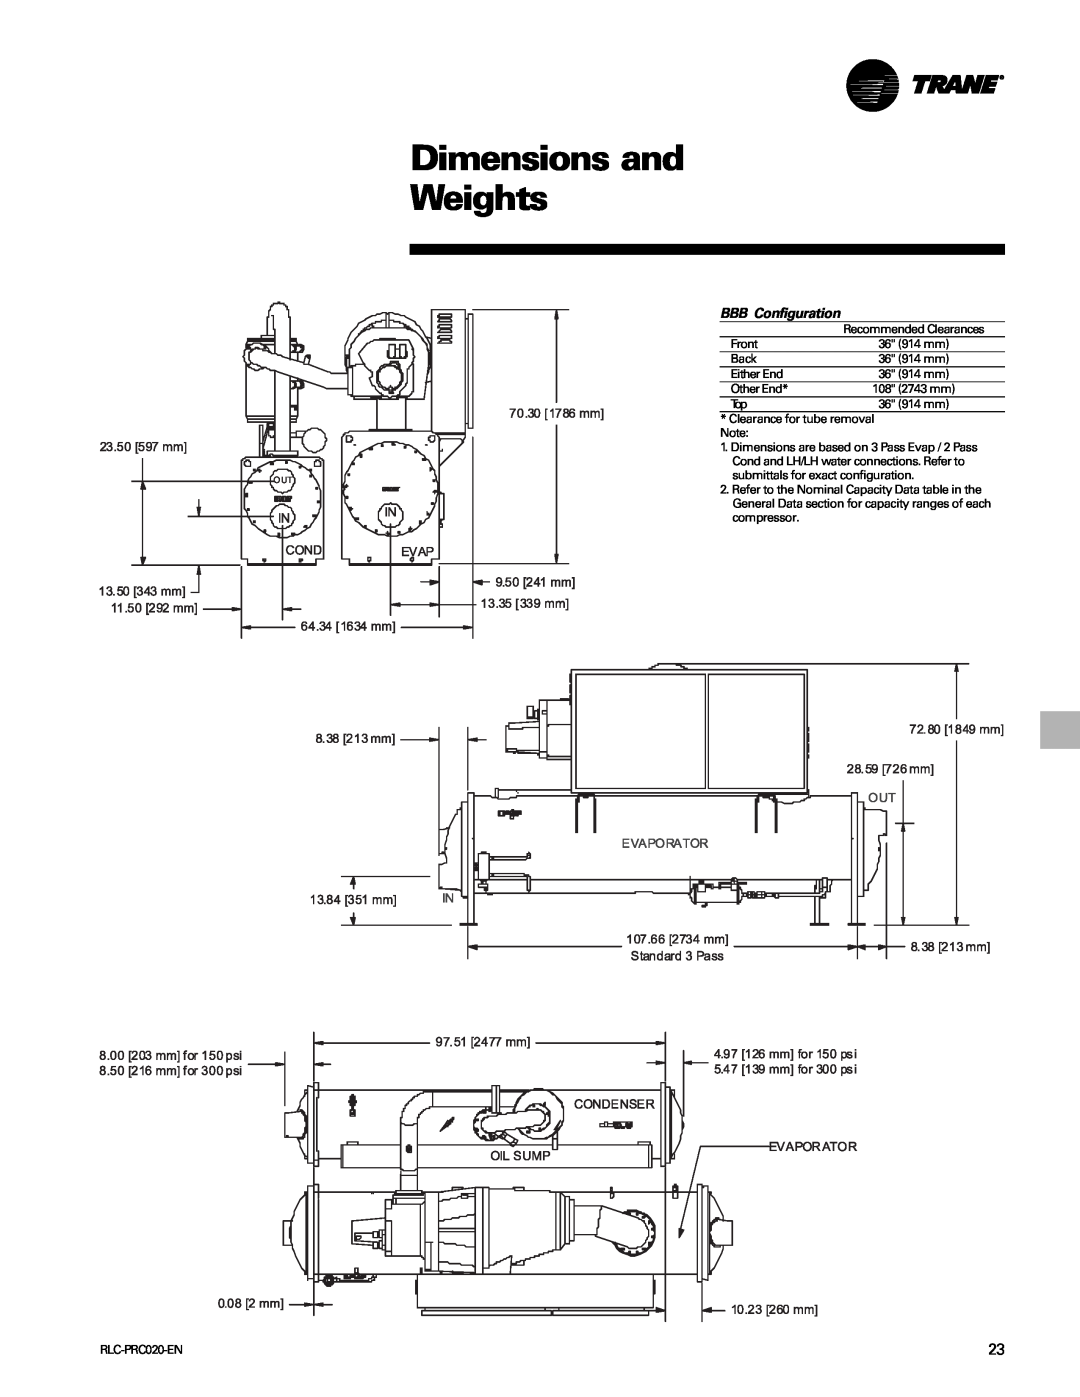 Trane RTHD manual Dimensions and Weights, BBB Configuration 